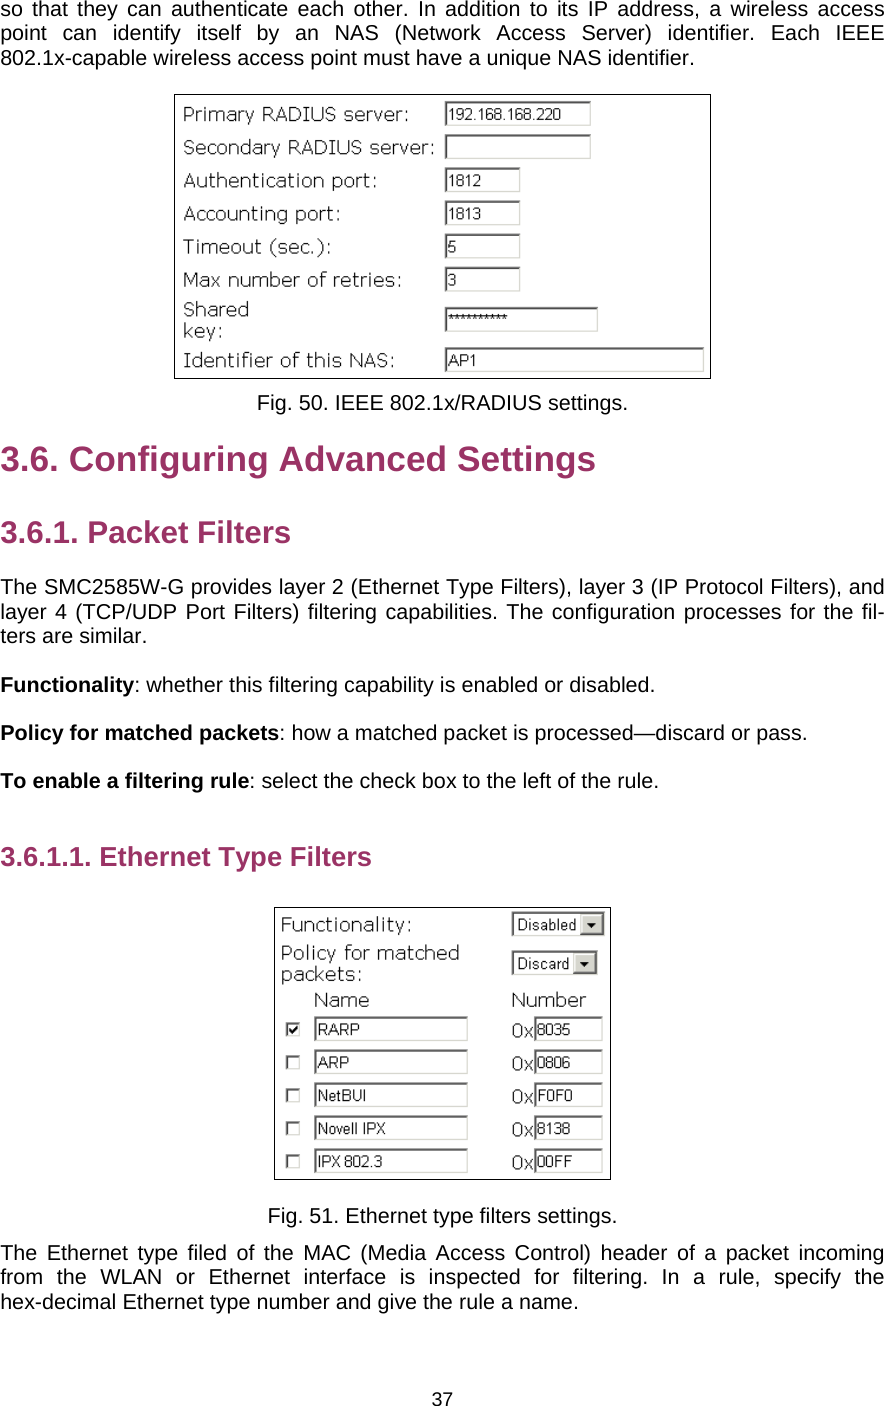   37so that they can authenticate each other. In addition to its IP address, a wireless access point can identify itself by an NAS (Network Access Server) identifier. Each IEEE 802.1x-capable wireless access point must have a unique NAS identifier.  Fig. 50. IEEE 802.1x/RADIUS settings. 3.6. Configuring Advanced Settings 3.6.1. Packet Filters The SMC2585W-G provides layer 2 (Ethernet Type Filters), layer 3 (IP Protocol Filters), and layer 4 (TCP/UDP Port Filters) filtering capabilities. The configuration processes for the fil-ters are similar. Functionality: whether this filtering capability is enabled or disabled. Policy for matched packets: how a matched packet is processed—discard or pass. To enable a filtering rule: select the check box to the left of the rule. 3.6.1.1. Ethernet Type Filters  Fig. 51. Ethernet type filters settings. The Ethernet type filed of the MAC (Media Access Control) header of a packet incoming from the WLAN or Ethernet interface is inspected for filtering. In a rule, specify the hex-decimal Ethernet type number and give the rule a name. 